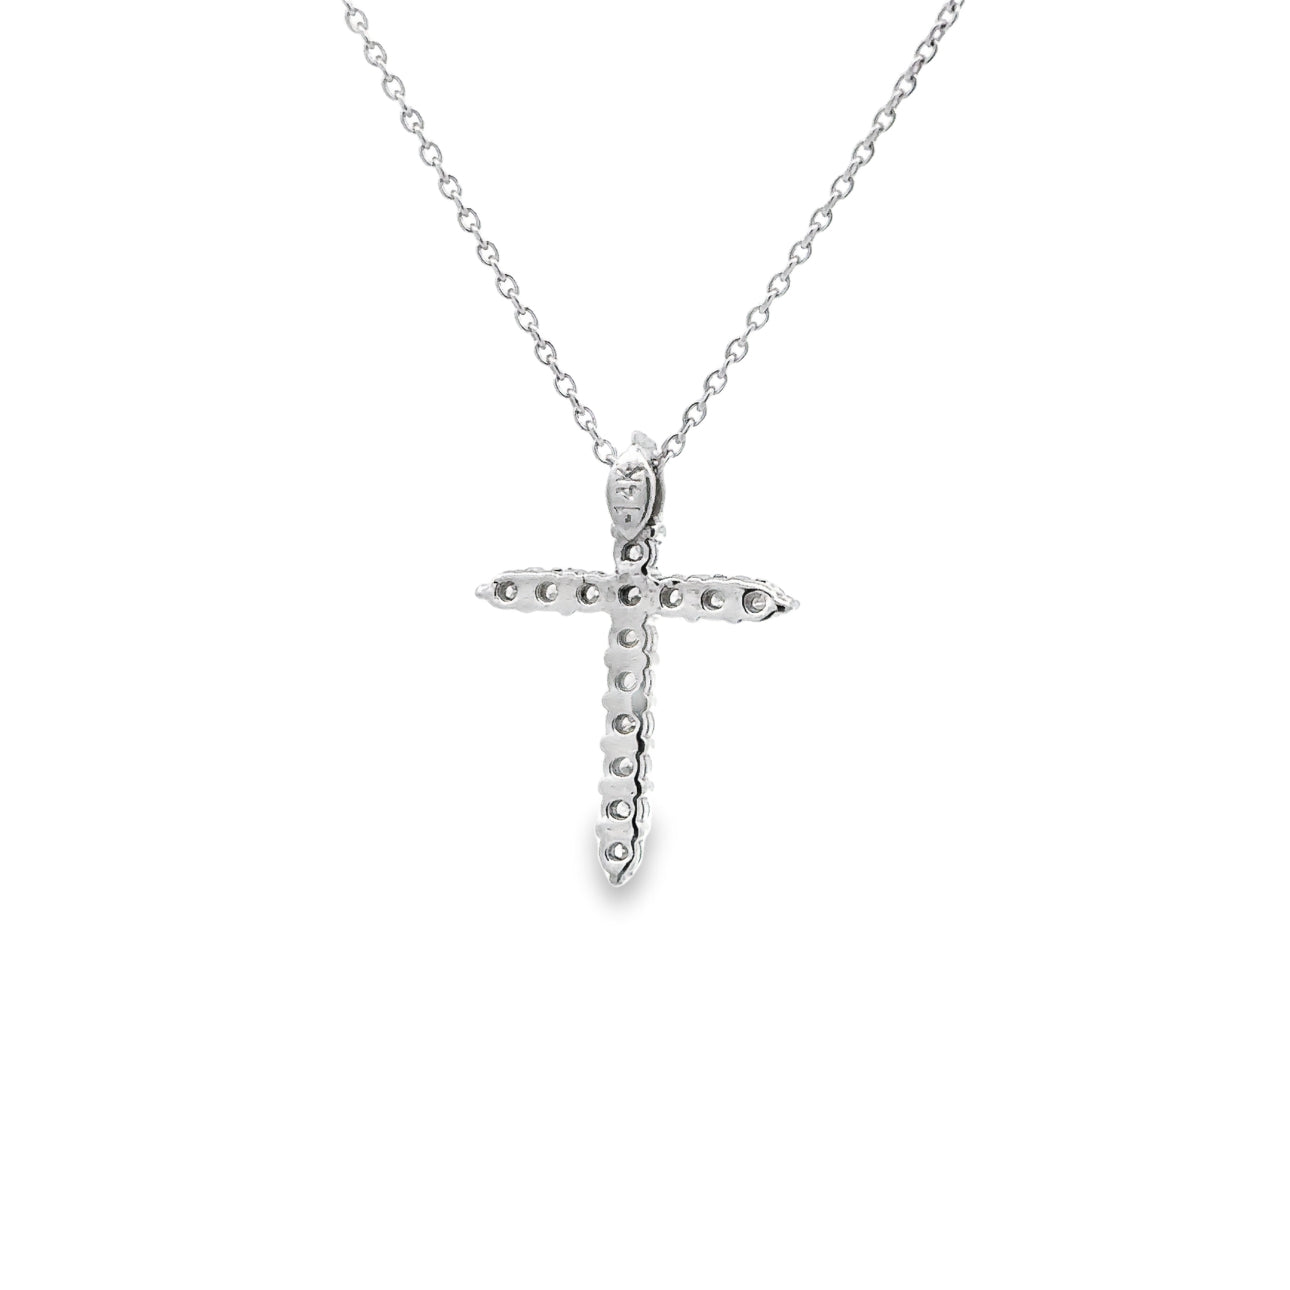 WD1319 White Gold and Diamond Cross Necklace